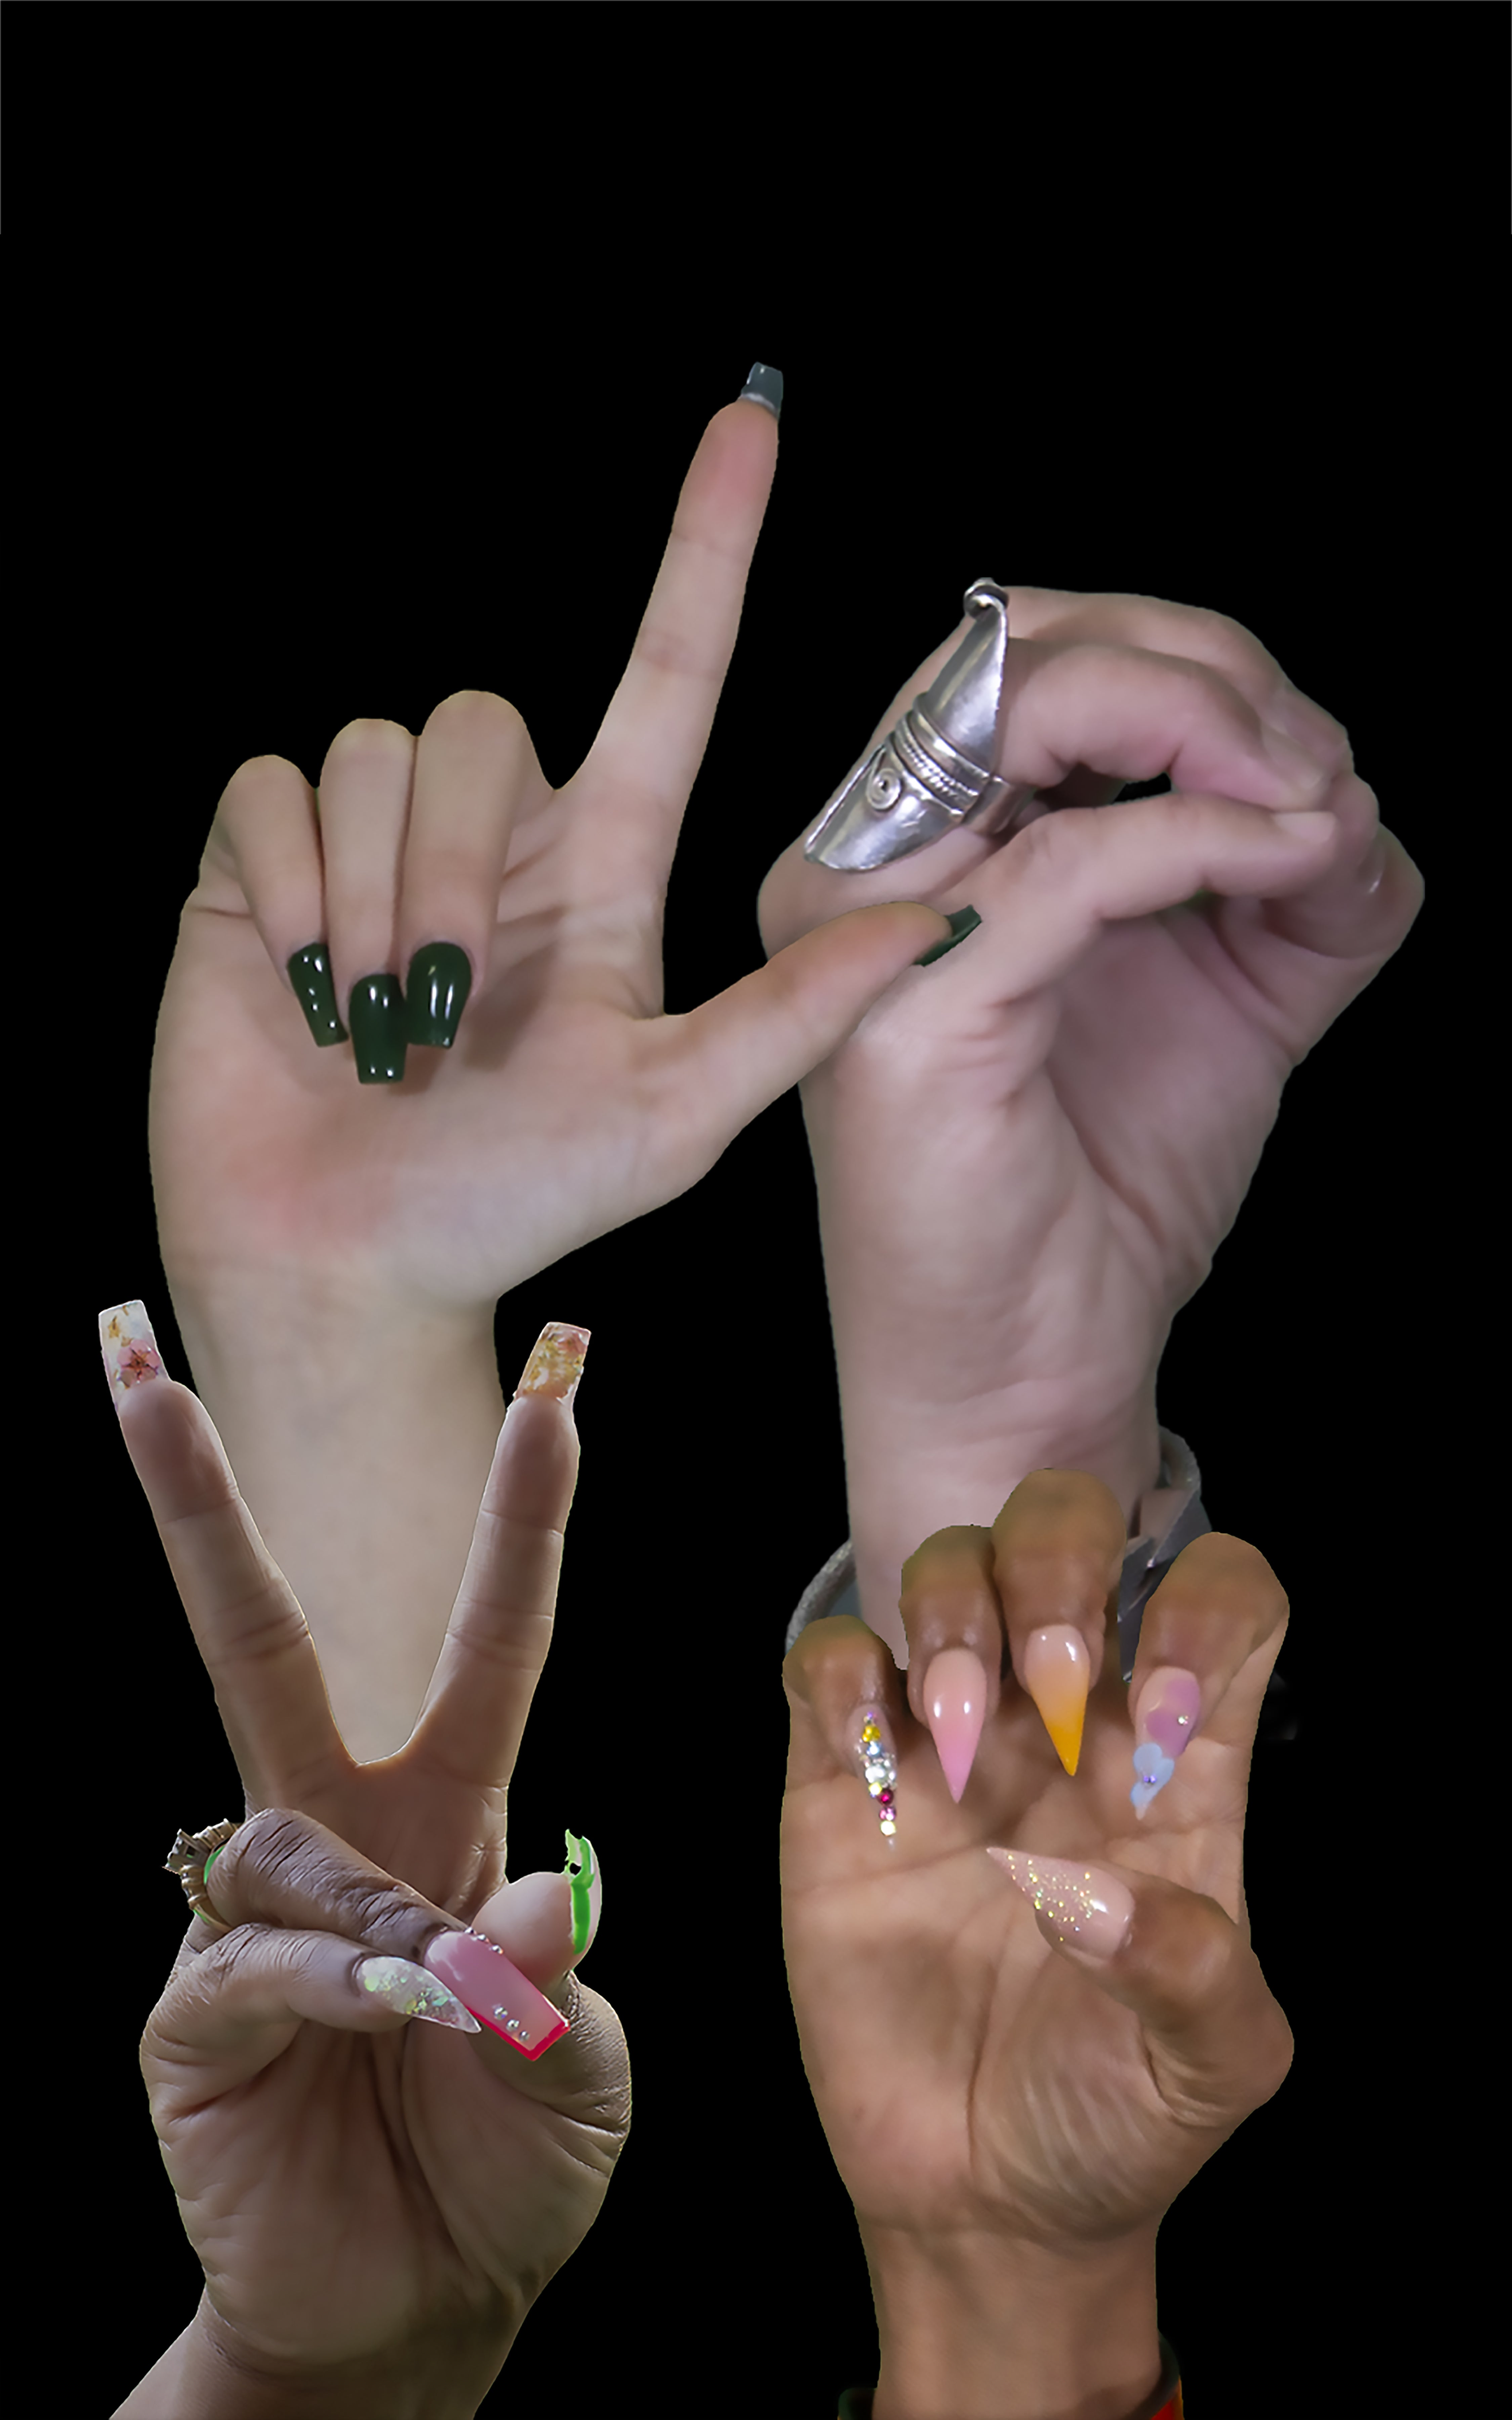 Four hands, each of varying skin tone, each using ASL to sign a different letter, spelling the word “Love”. The hands are adorned by rings and acrylic nail art